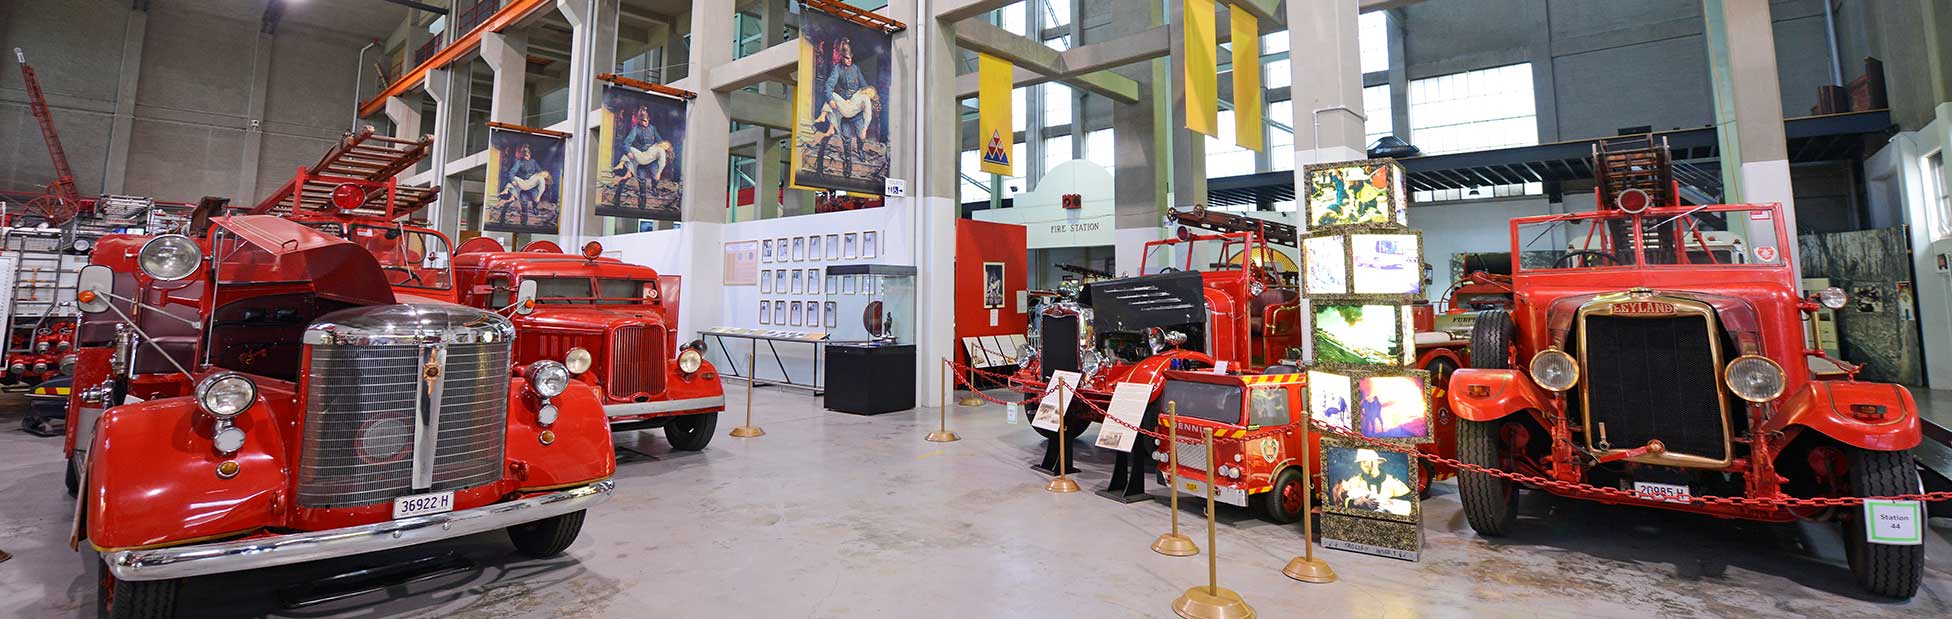 Trucks at Museum of Fire